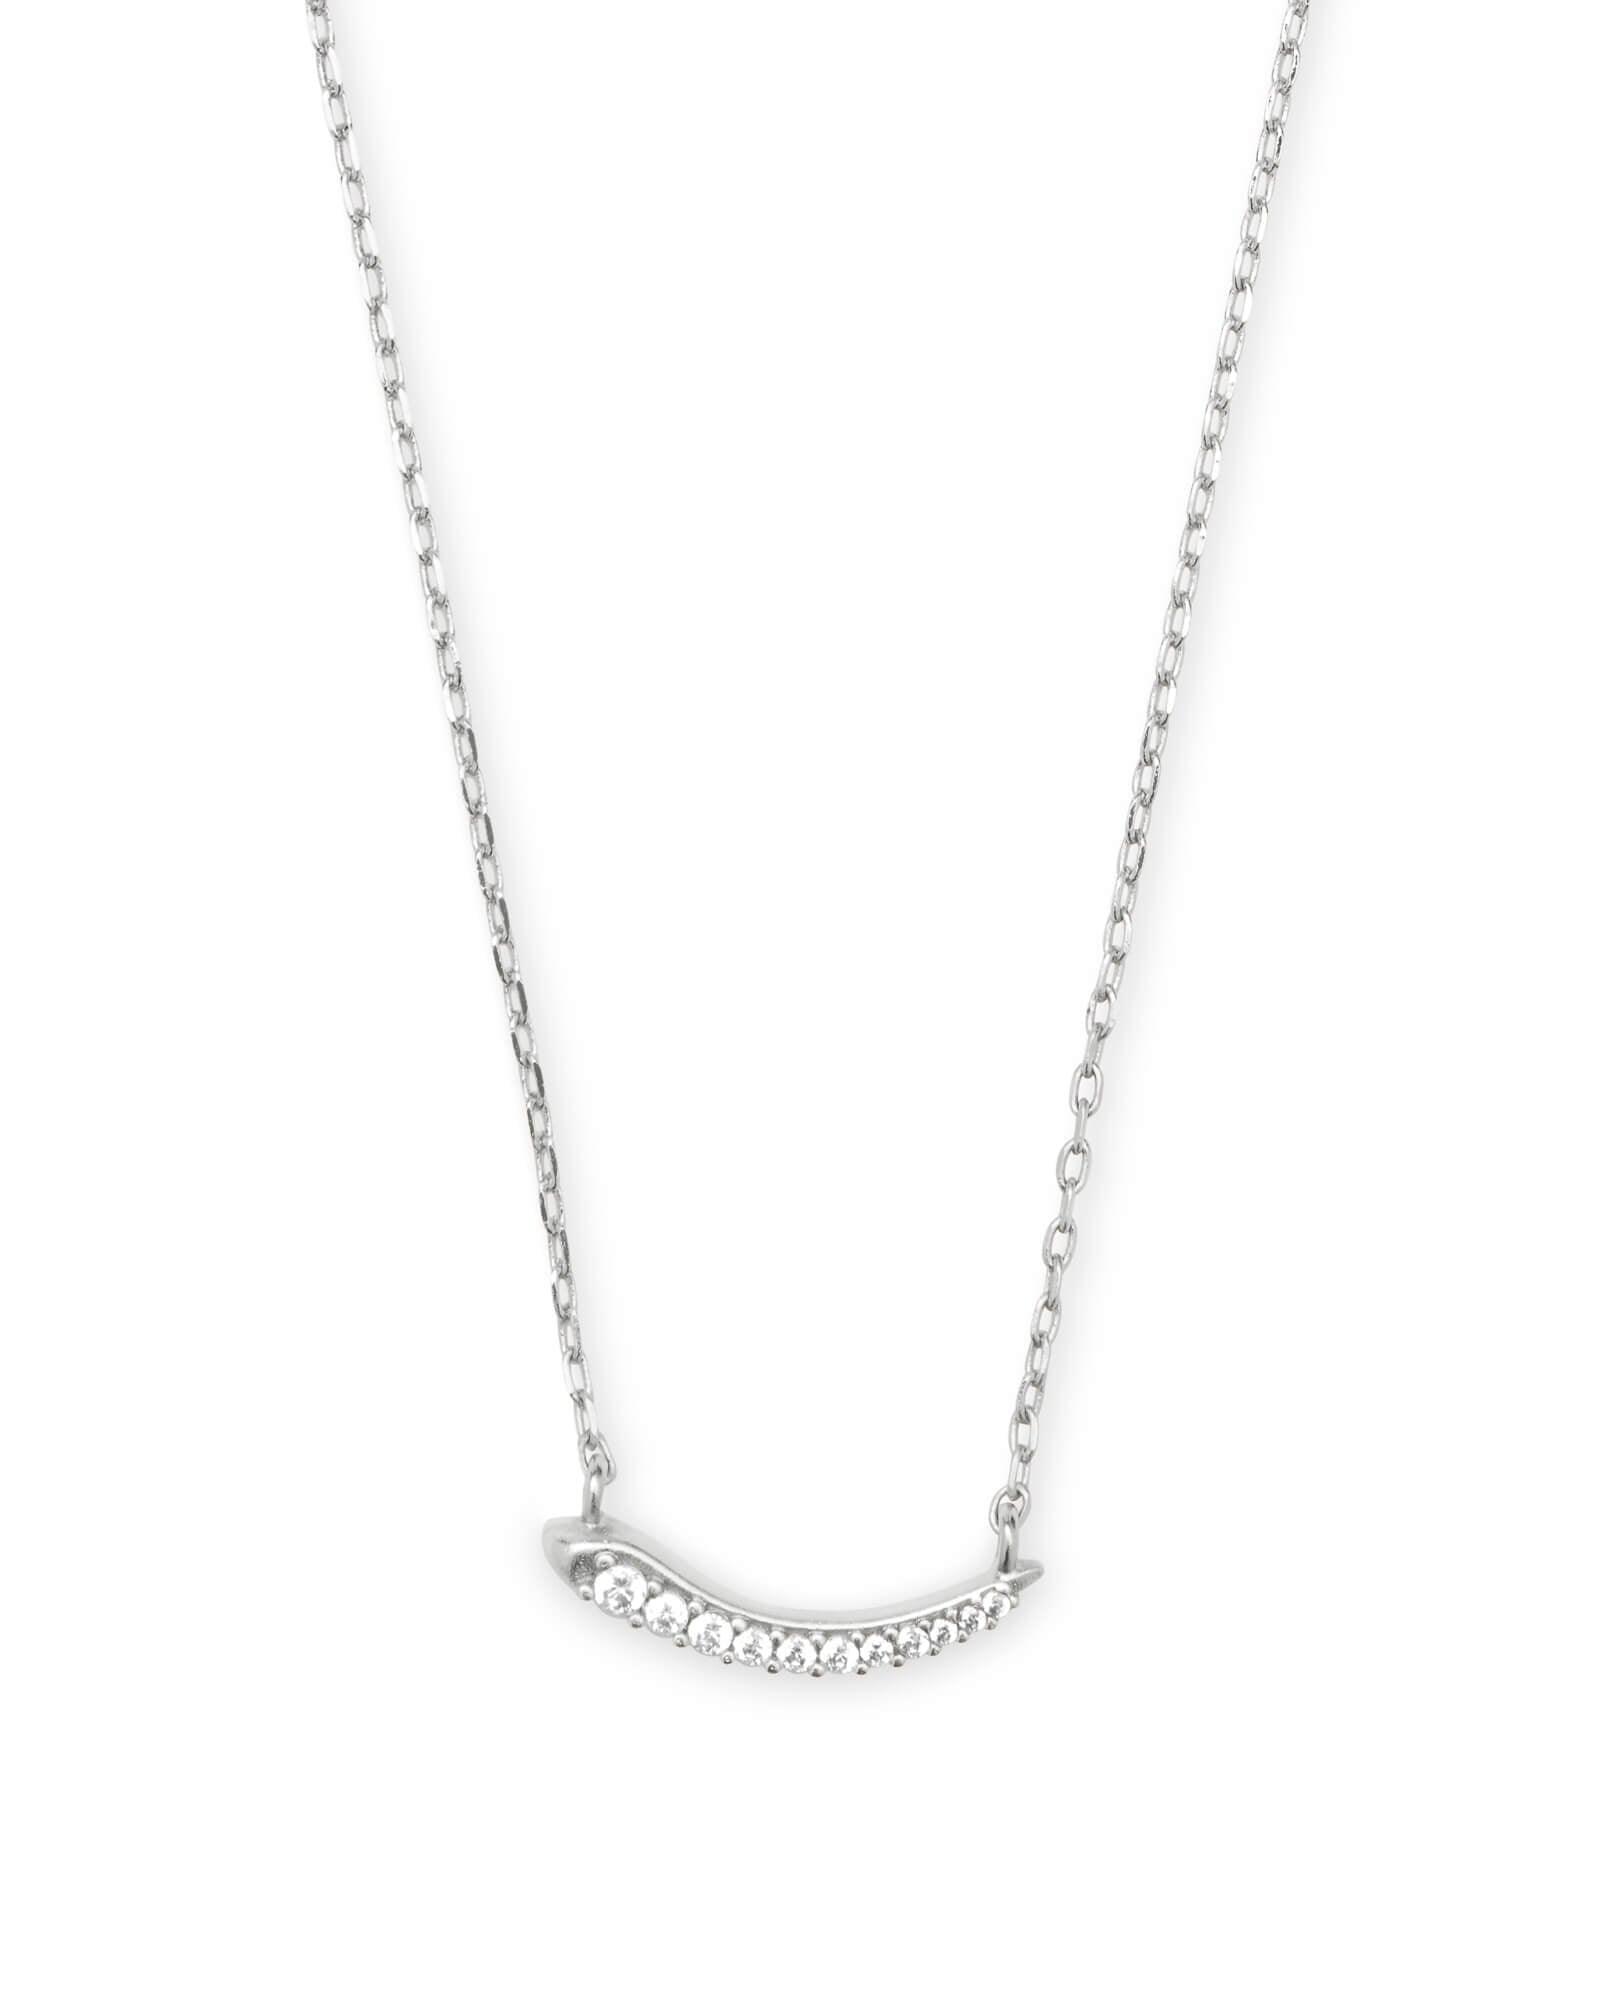 Whitlee Necklace - The Silver Dahlia